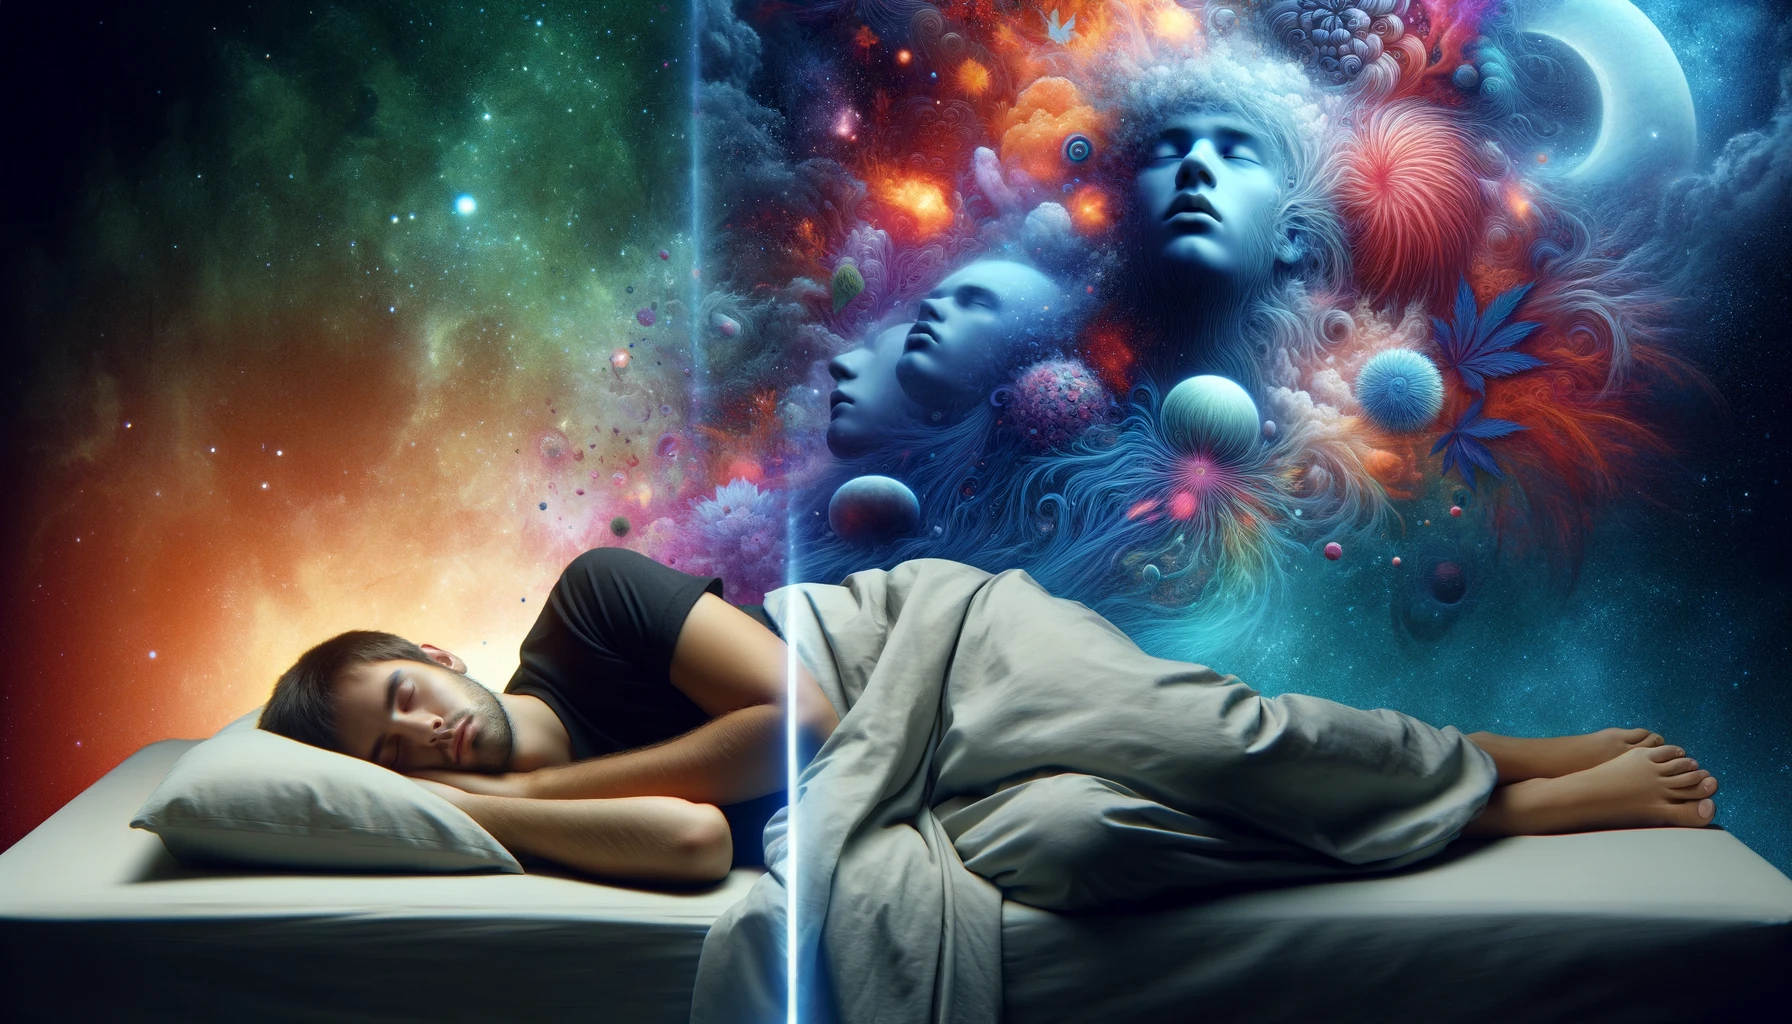 Split image contrasting sleep experiences with and without cannabis